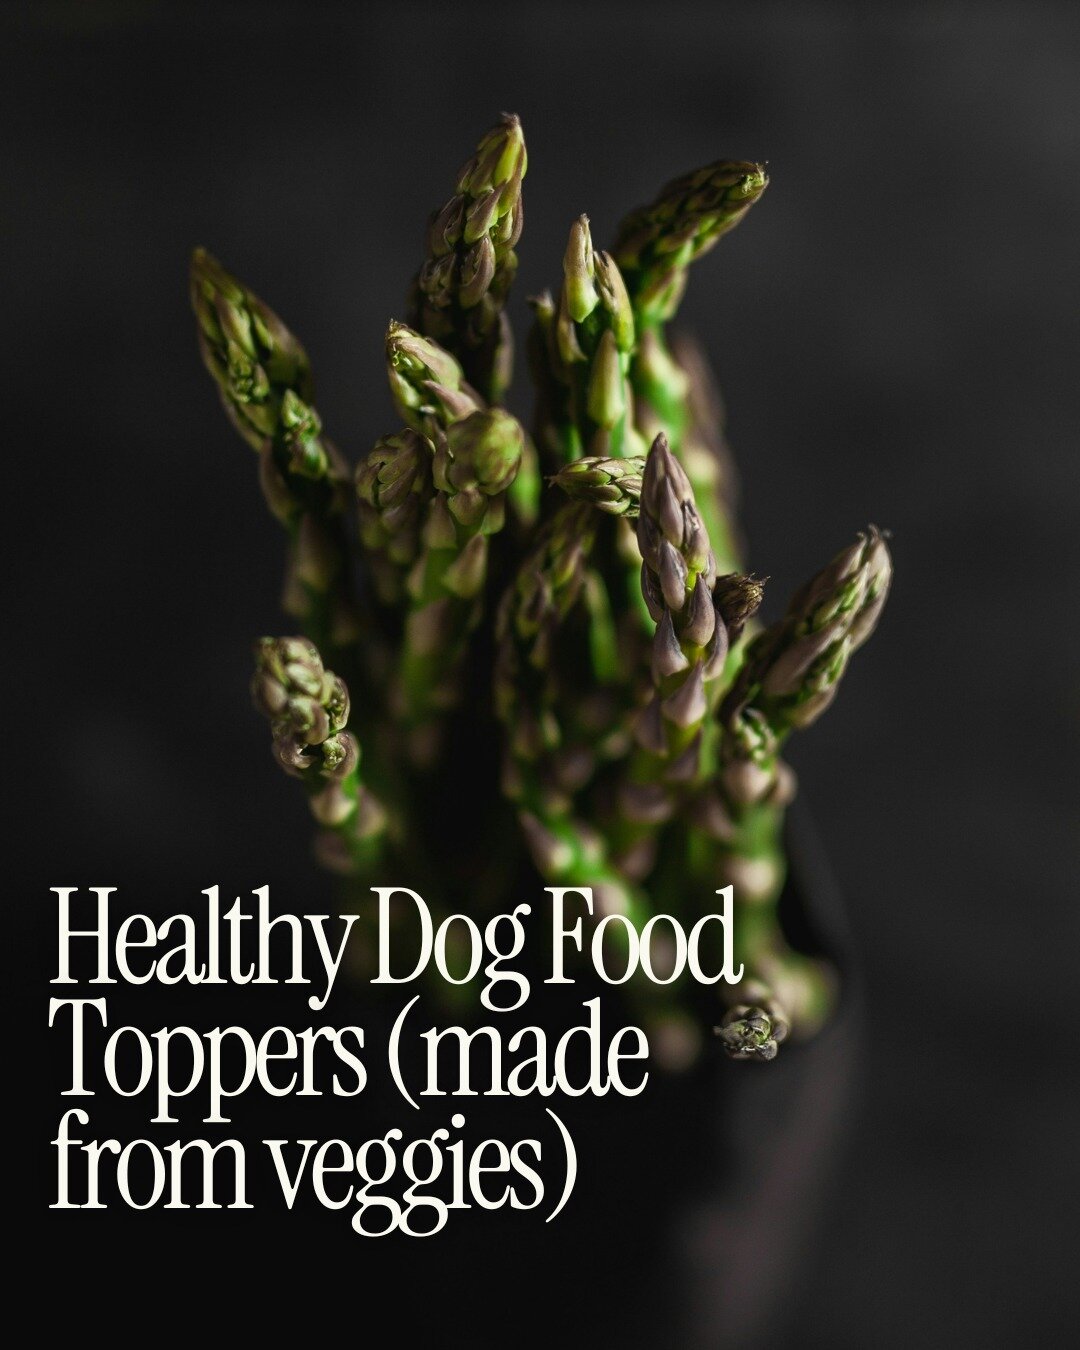 Years ago we used to say &ldquo;eat your veggies it&rsquo;s good for vitamins.  Today we know so much more about nutrition.⁠
⁠
Vegetables have different health benefits for your dog. If they are struggling with inflammation, hydration, or gut health,